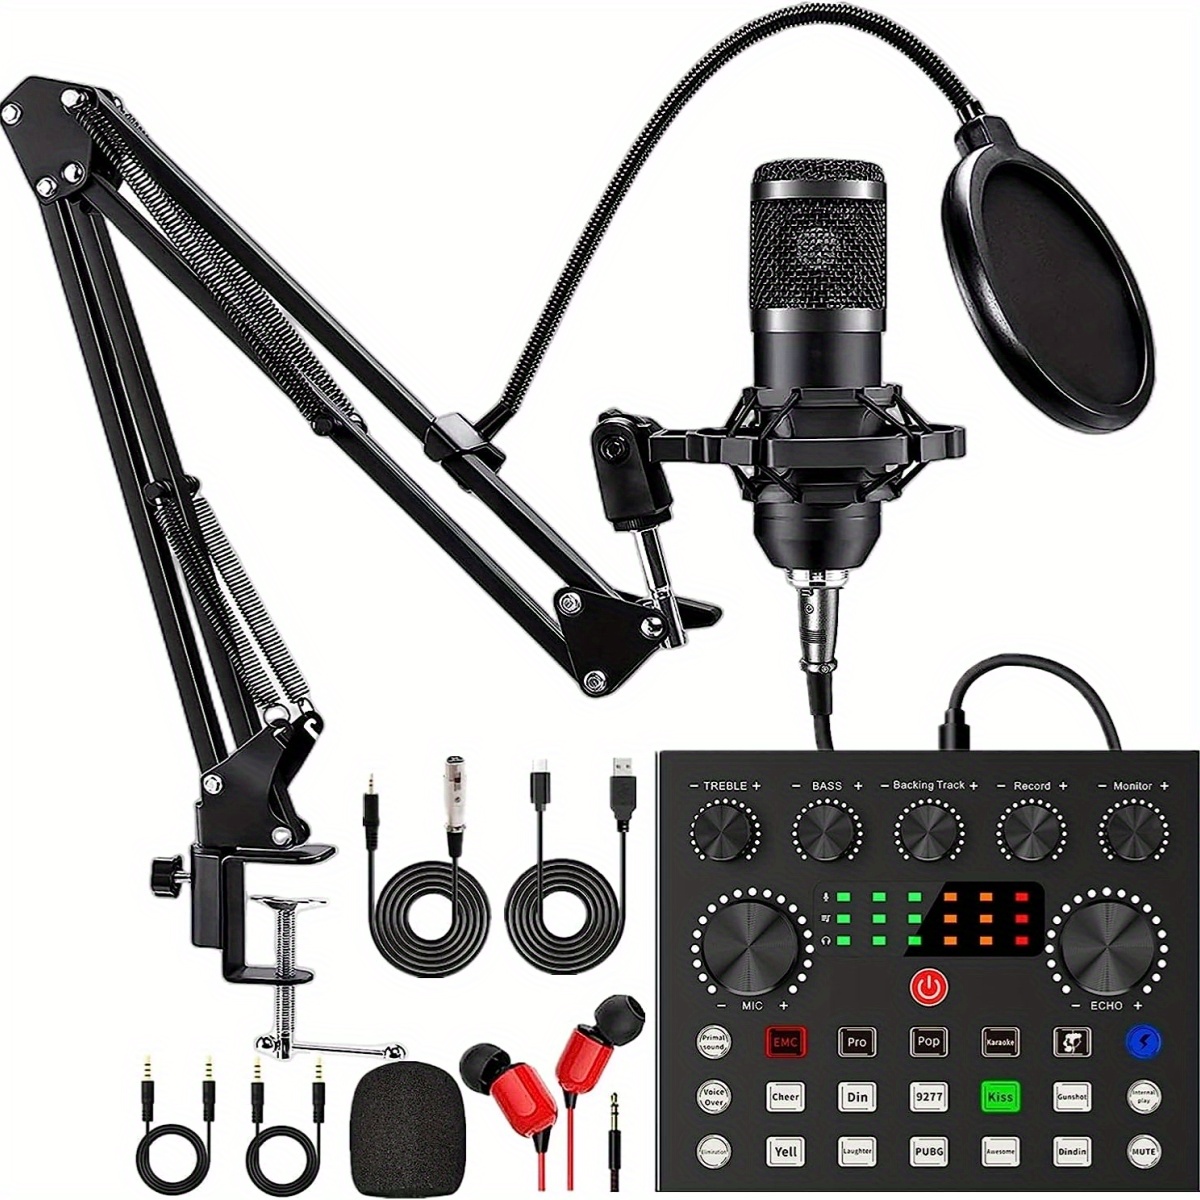 PROAR Microphone for Podcast, USB Microphone Kit for Phone,  PC/Micro/Mac/Android,Professional Plug&Play Studio Microphone with Stand  for Gaming